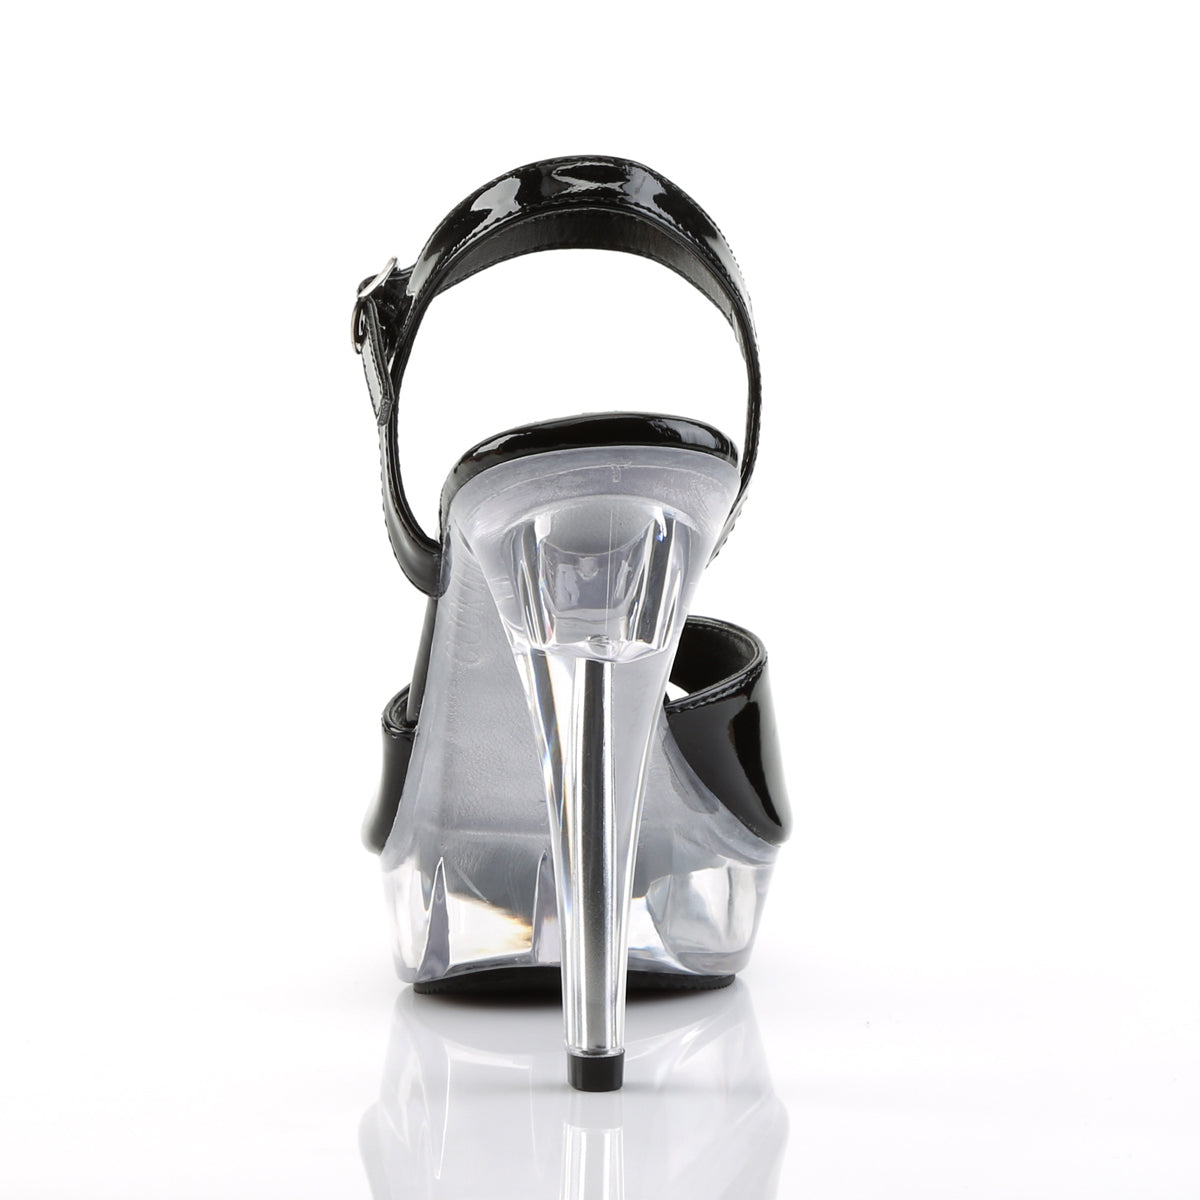 COCKTAIL-509 Black & Clear Ankle Sandal High Heel Black & Clear Multi view 3